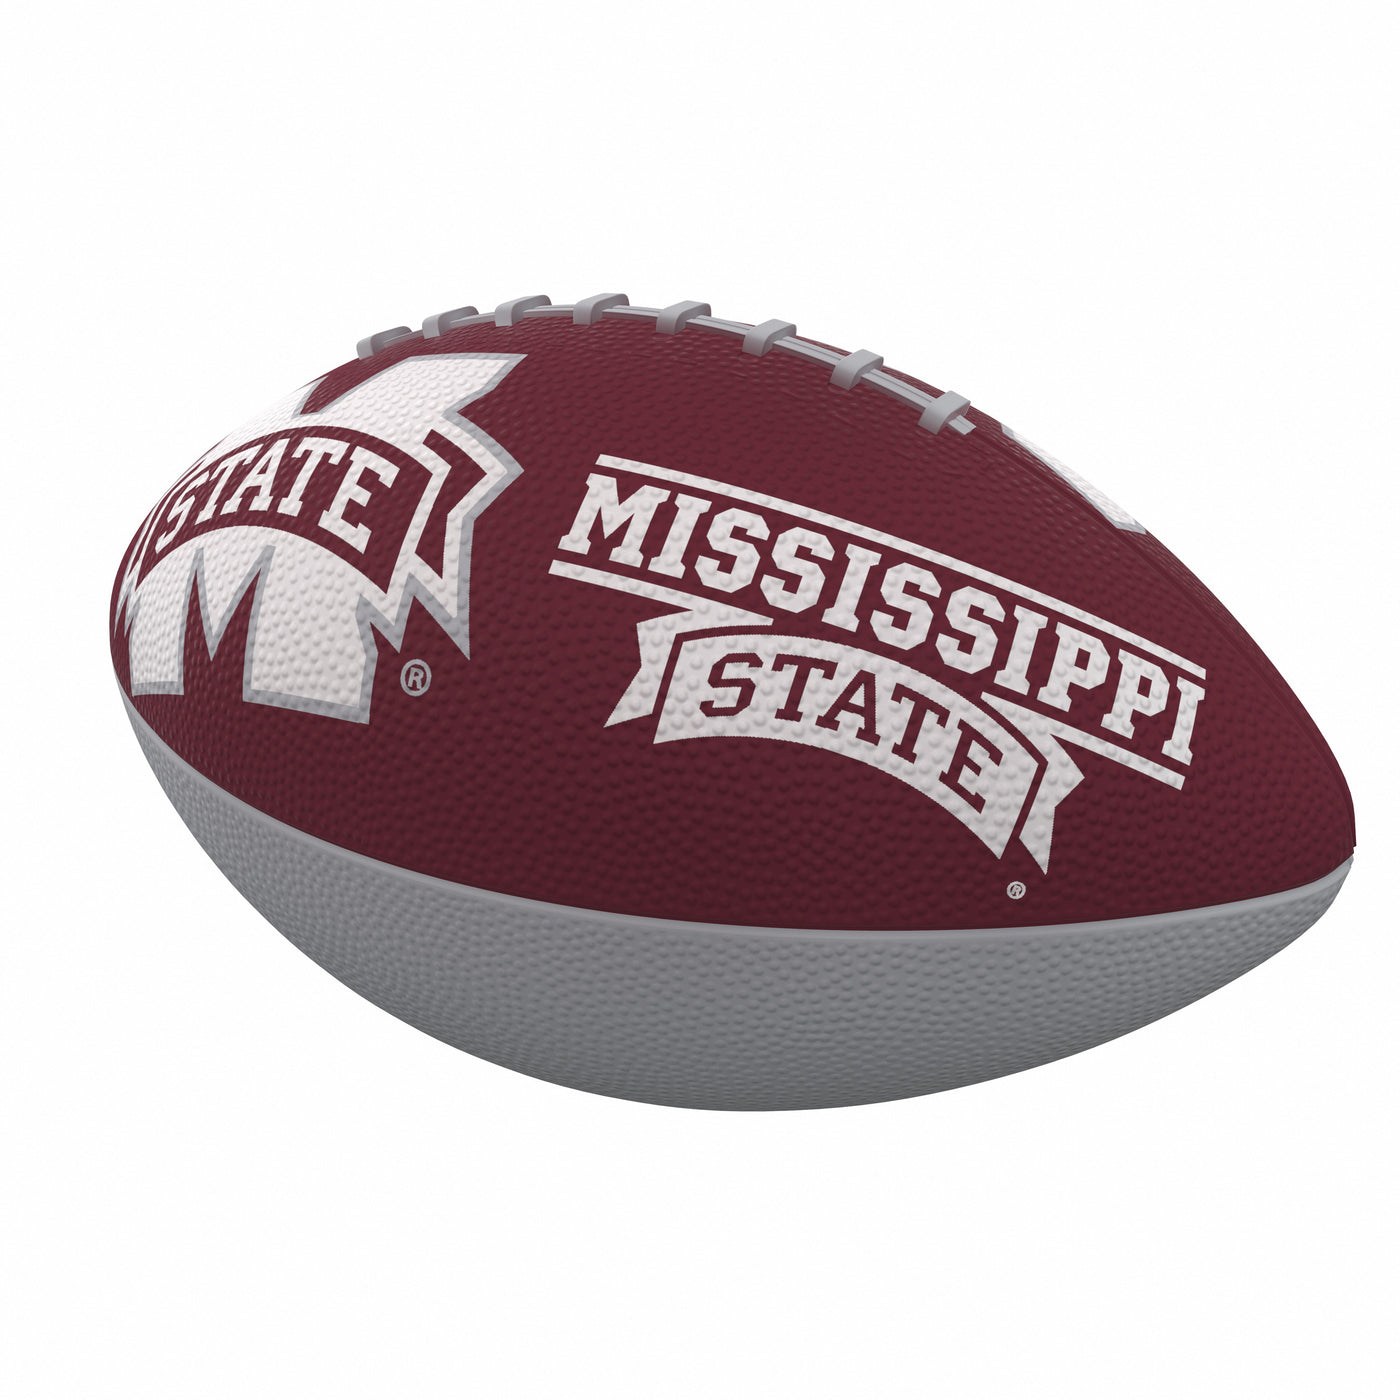 Mississippi State Combo Logo Junior-Size Rubber Football